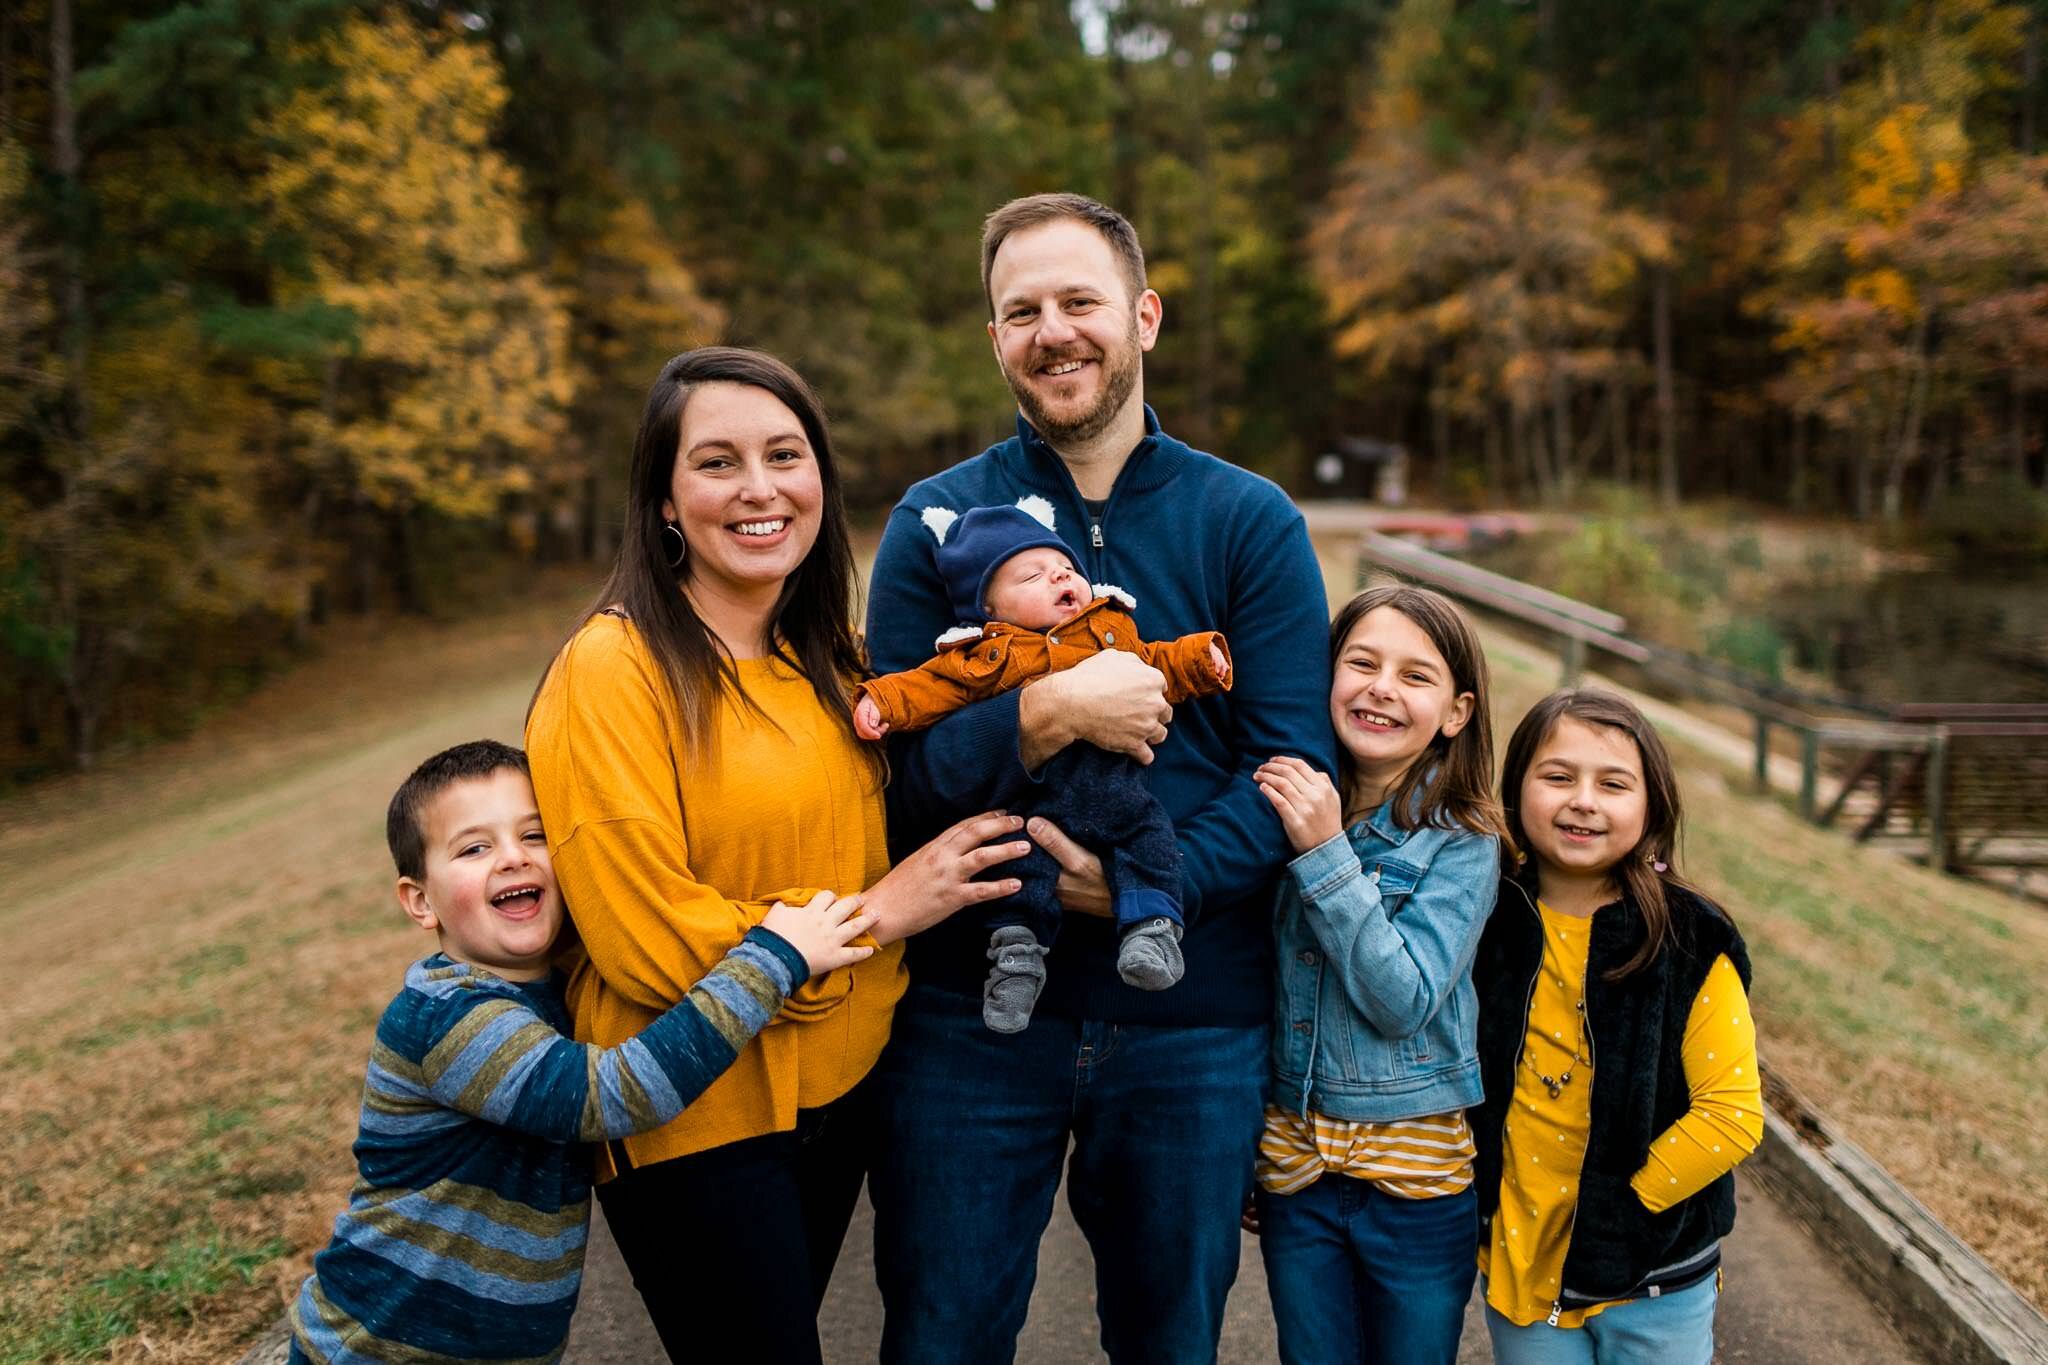 Raleigh Family Photographer | By G. Lin Photography | Fall Family Photo at Umstead Park